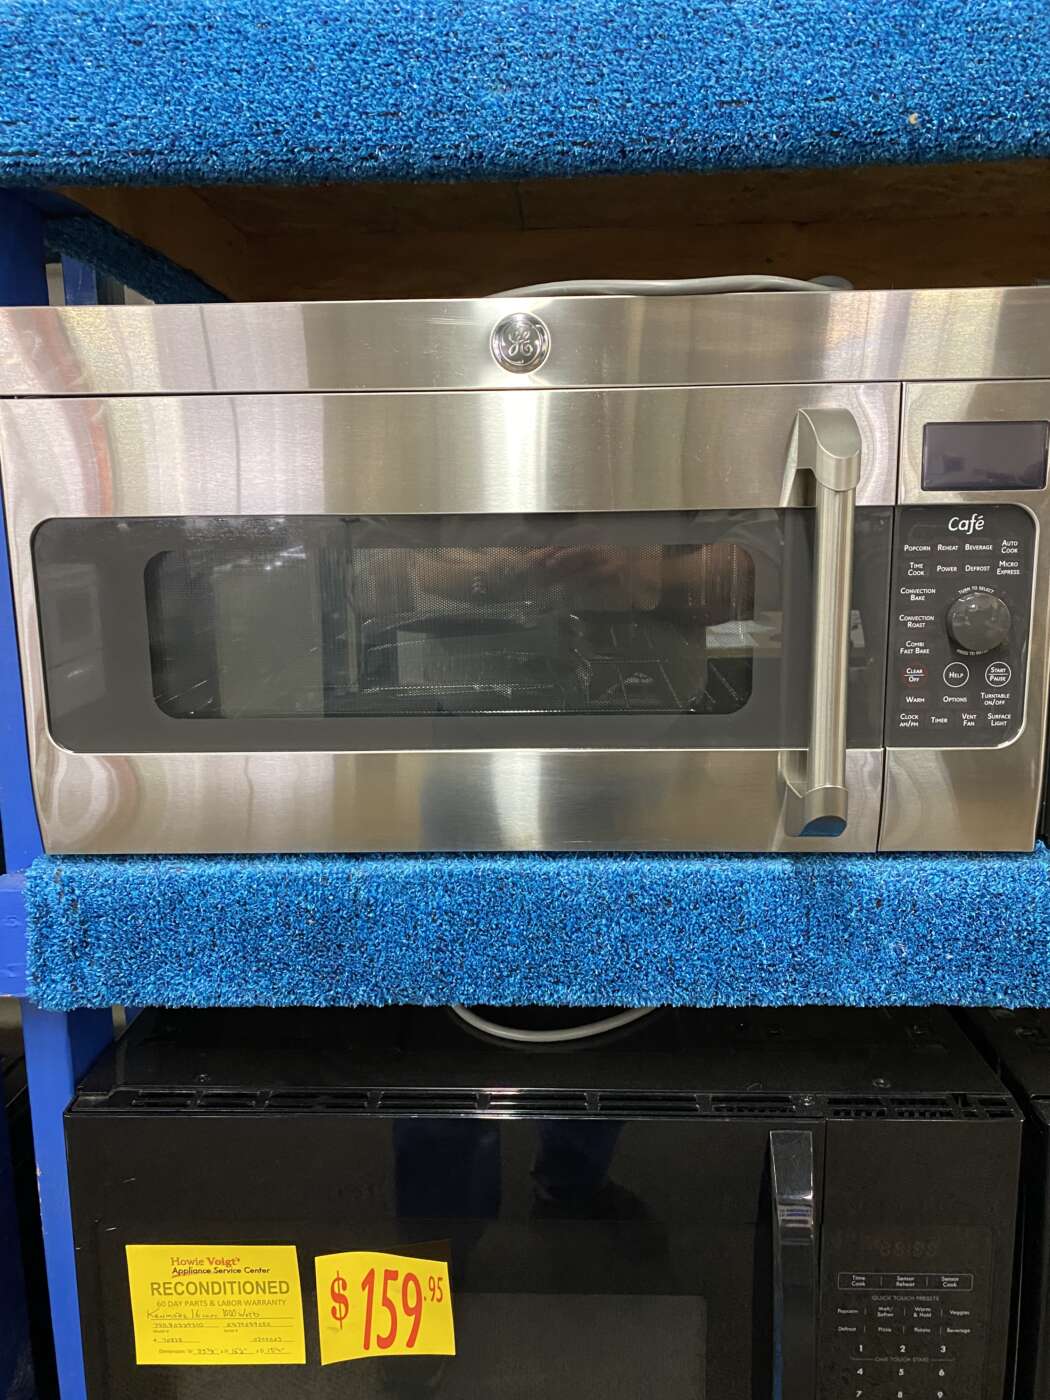 Reconditioned G/E 1.7 Cu. Ft. 1000 Watt OTR Microwave & Convection-Oven – Stainless